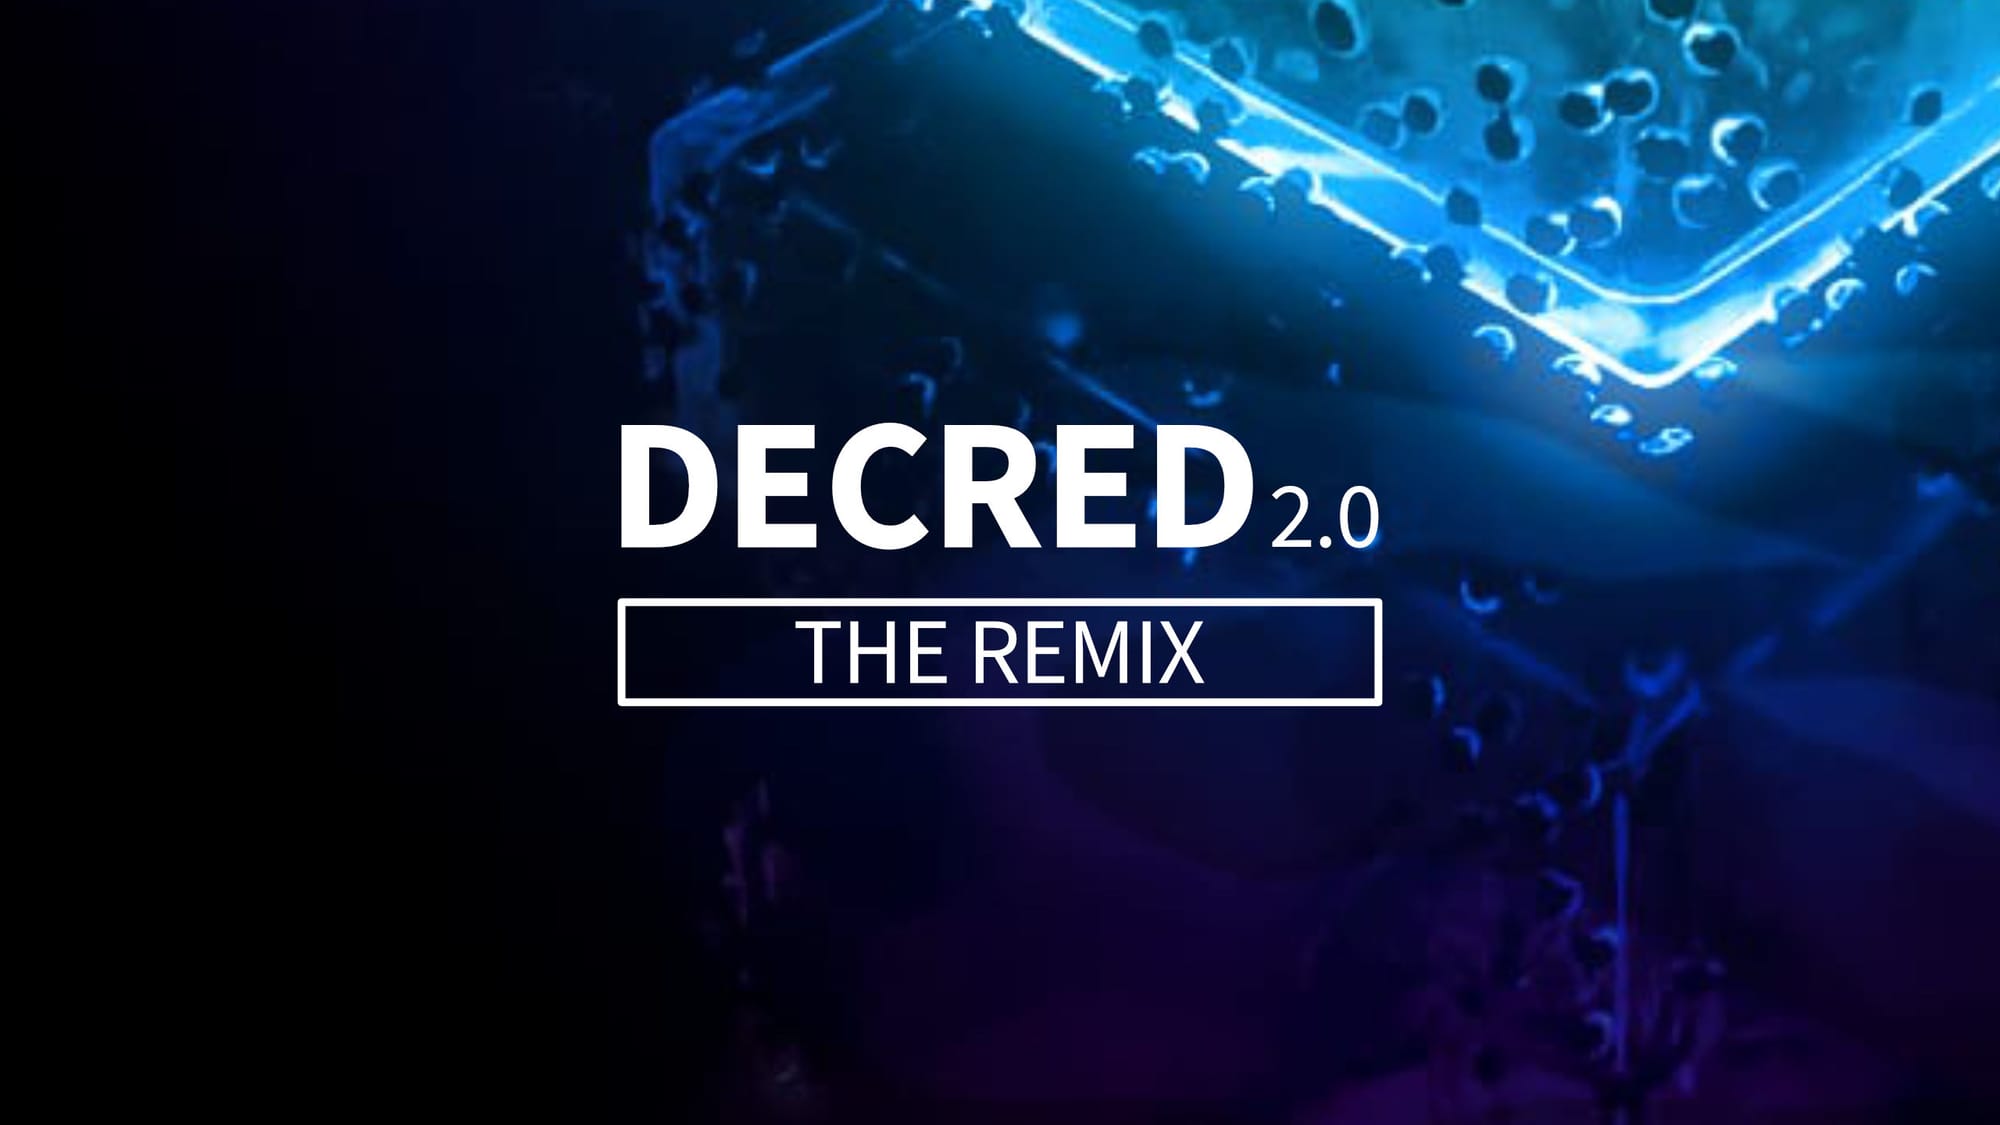 Decred 2.0 - A new level for decentralised networks